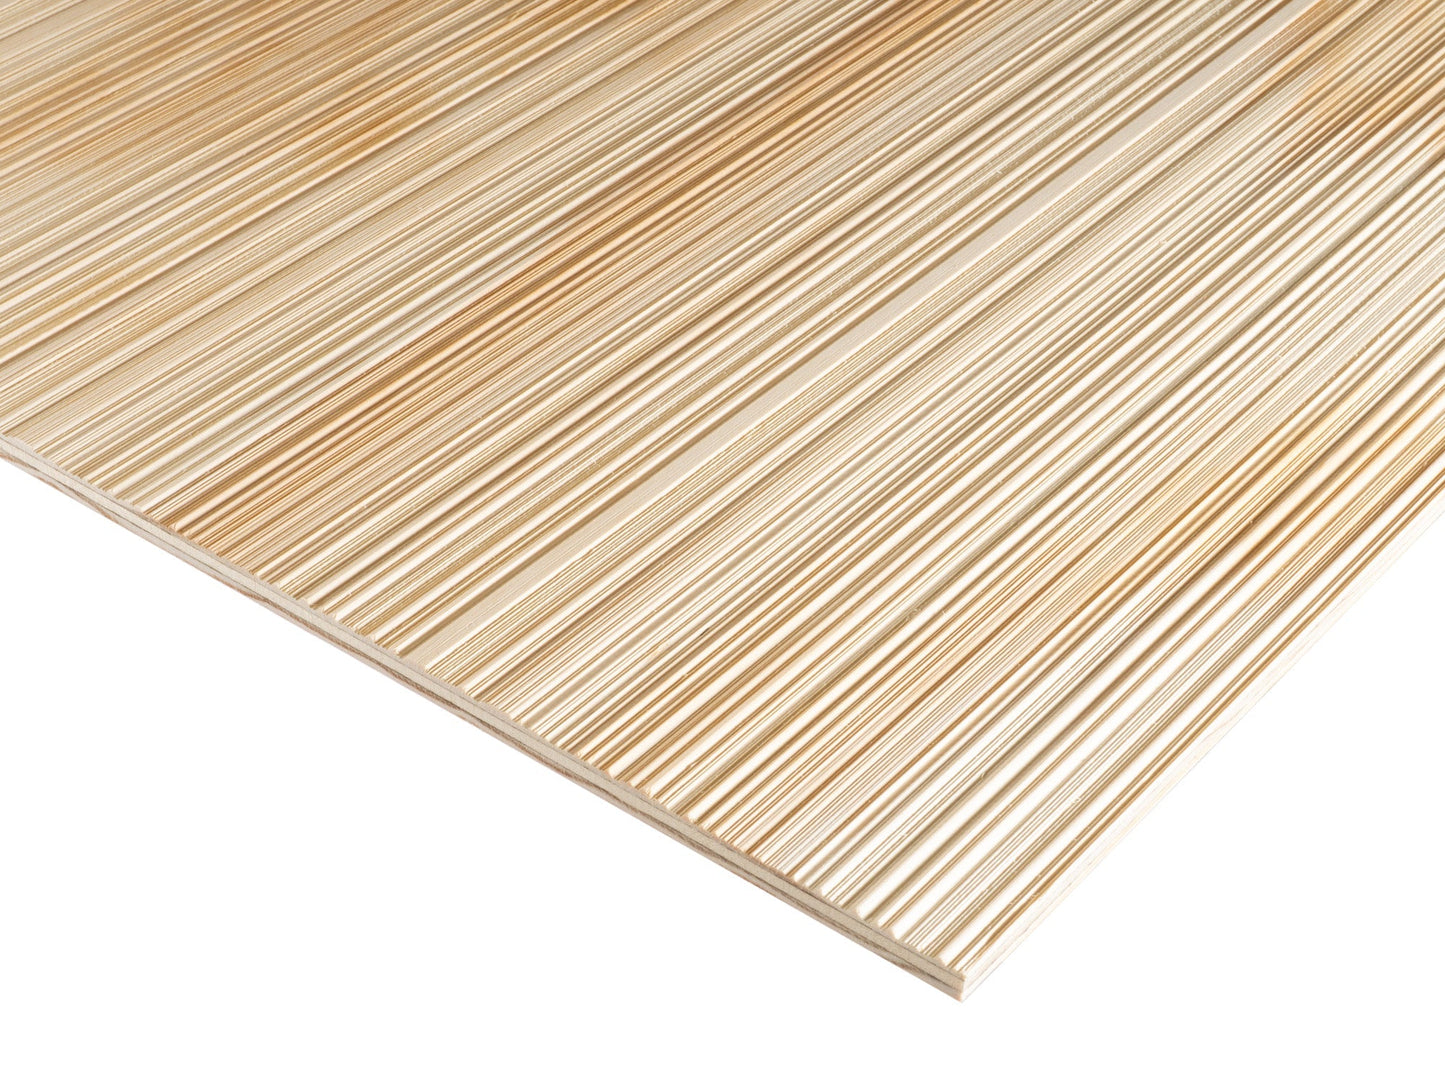 Close up of Weldtex tongue & groove white oak hardwood plank consisting of a combed, striated, brushed wood appearance common in mid-century modern homes and design